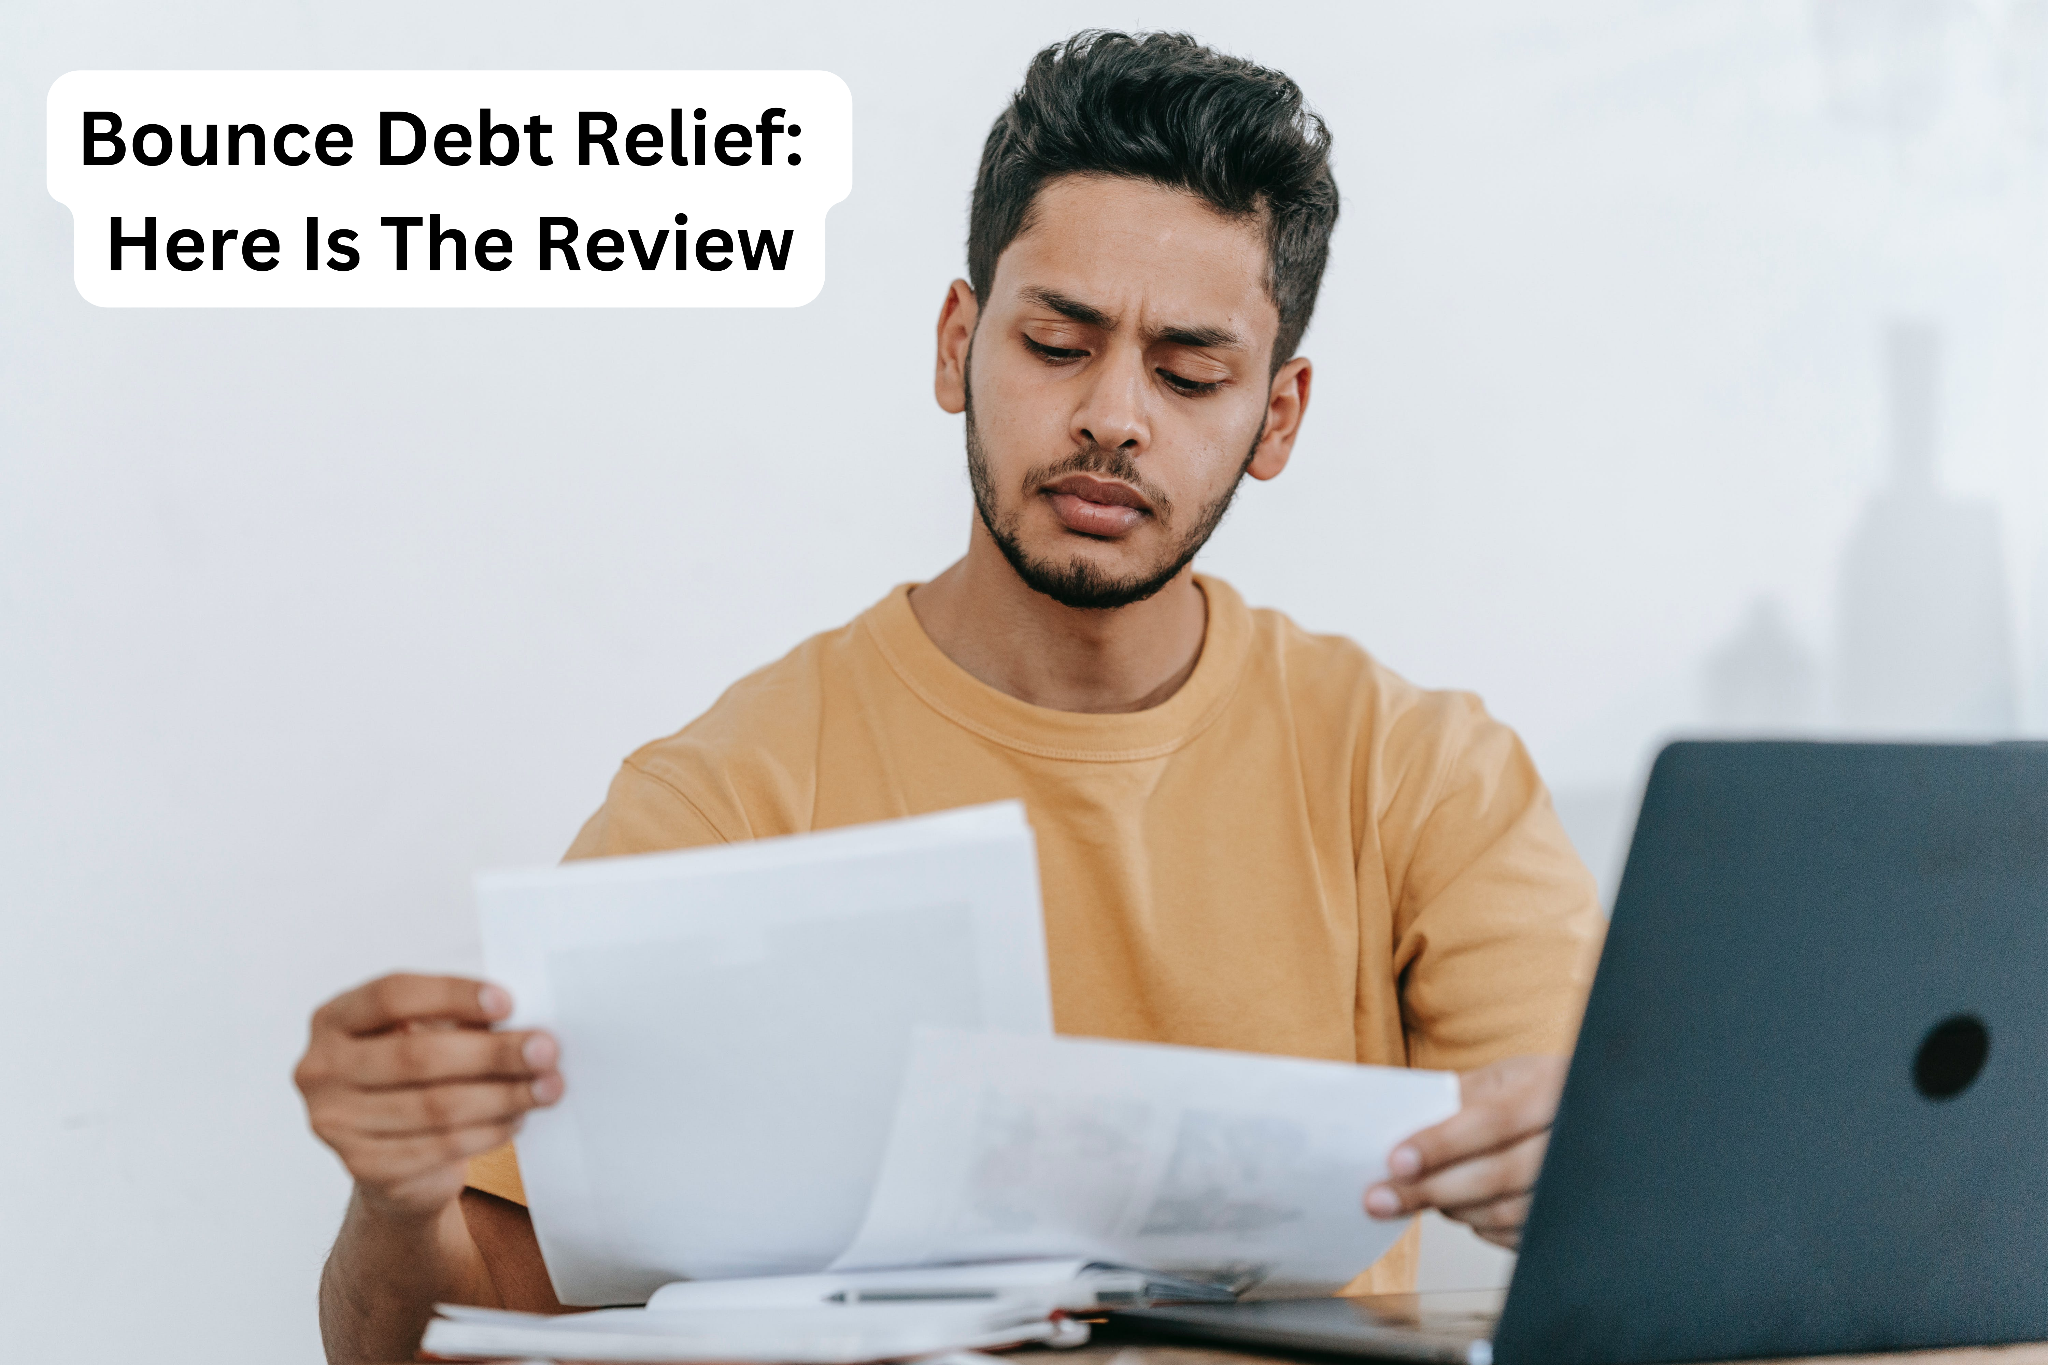 Bounce Debt Relief: Here Is The Review